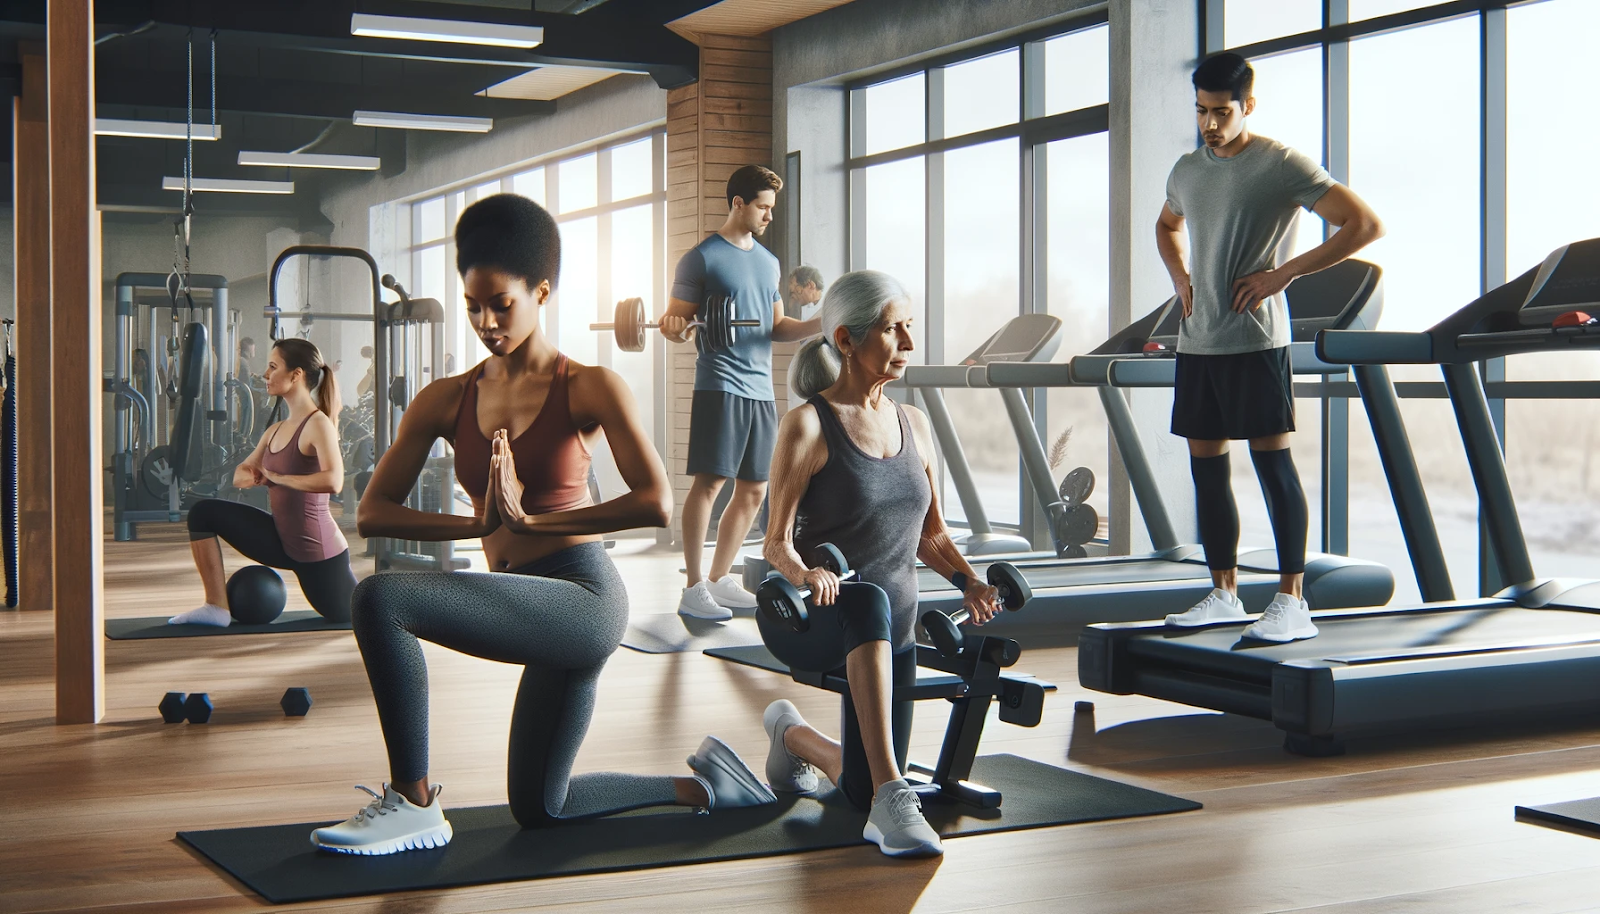 Alt: "A middle-aged Black woman practicing yoga, a young South Asian man lifting weights, and an elderly Caucasian woman walking on a treadmill in a bright gym